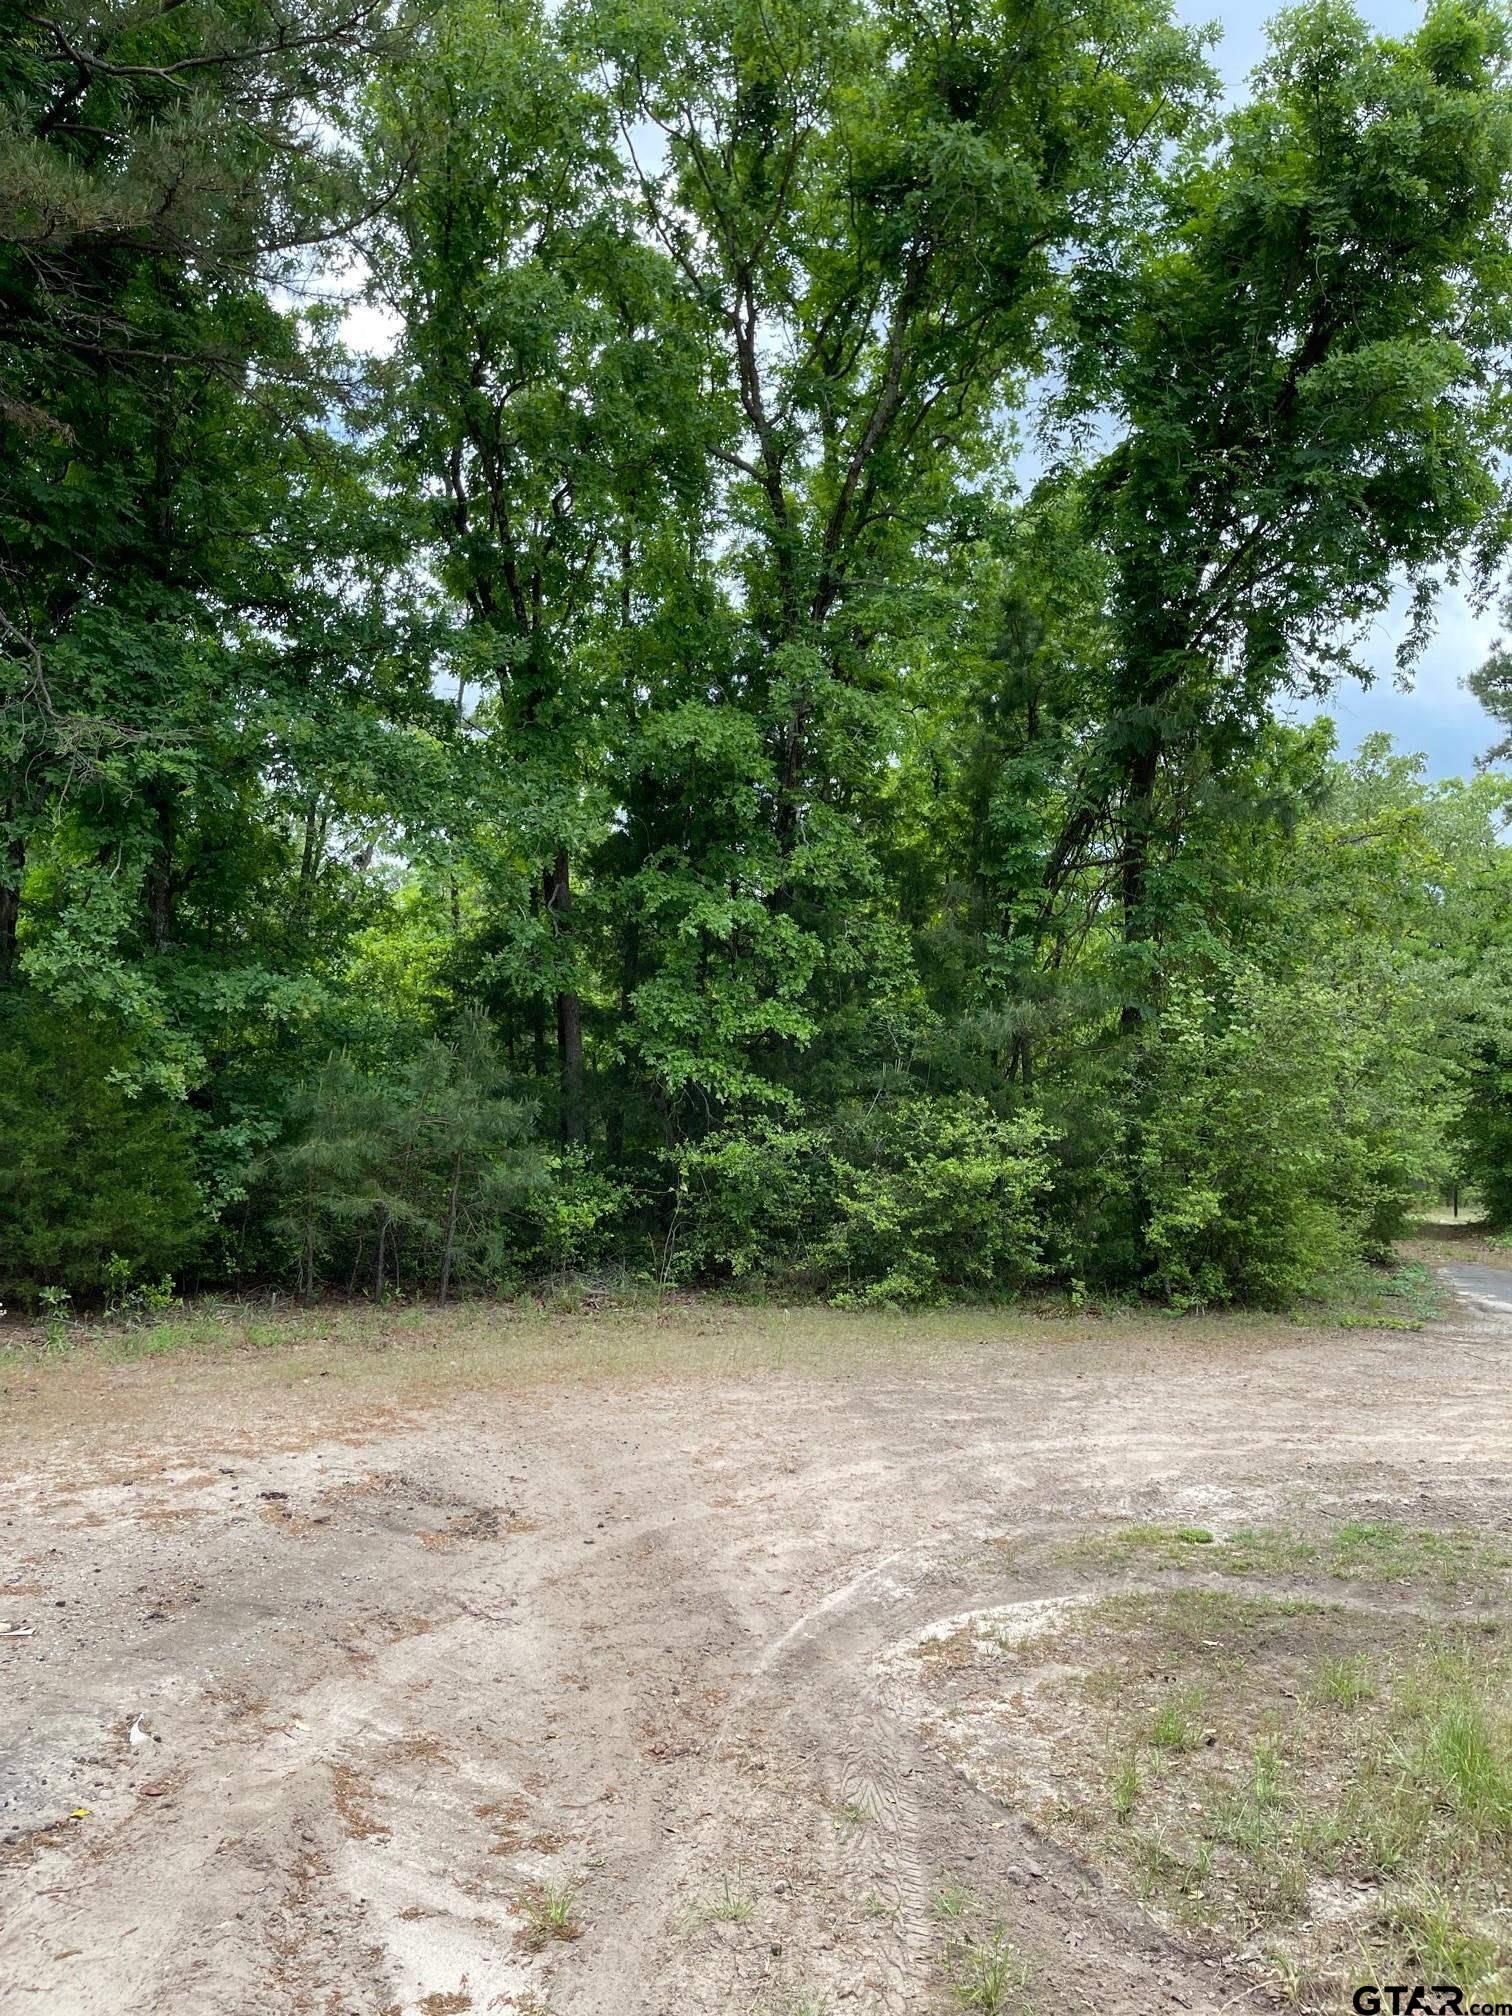 Three wooded lots located in Sec 3 of the gated community of Holly Lake Ranch. Two lots are connected while third lot is close. This secluded section has a pool but residents are able to enjoy all the amenities provided by Holly Lake Ranch such as fishing, pickleball and tennis, hiking trails, fitness center and much, much more.